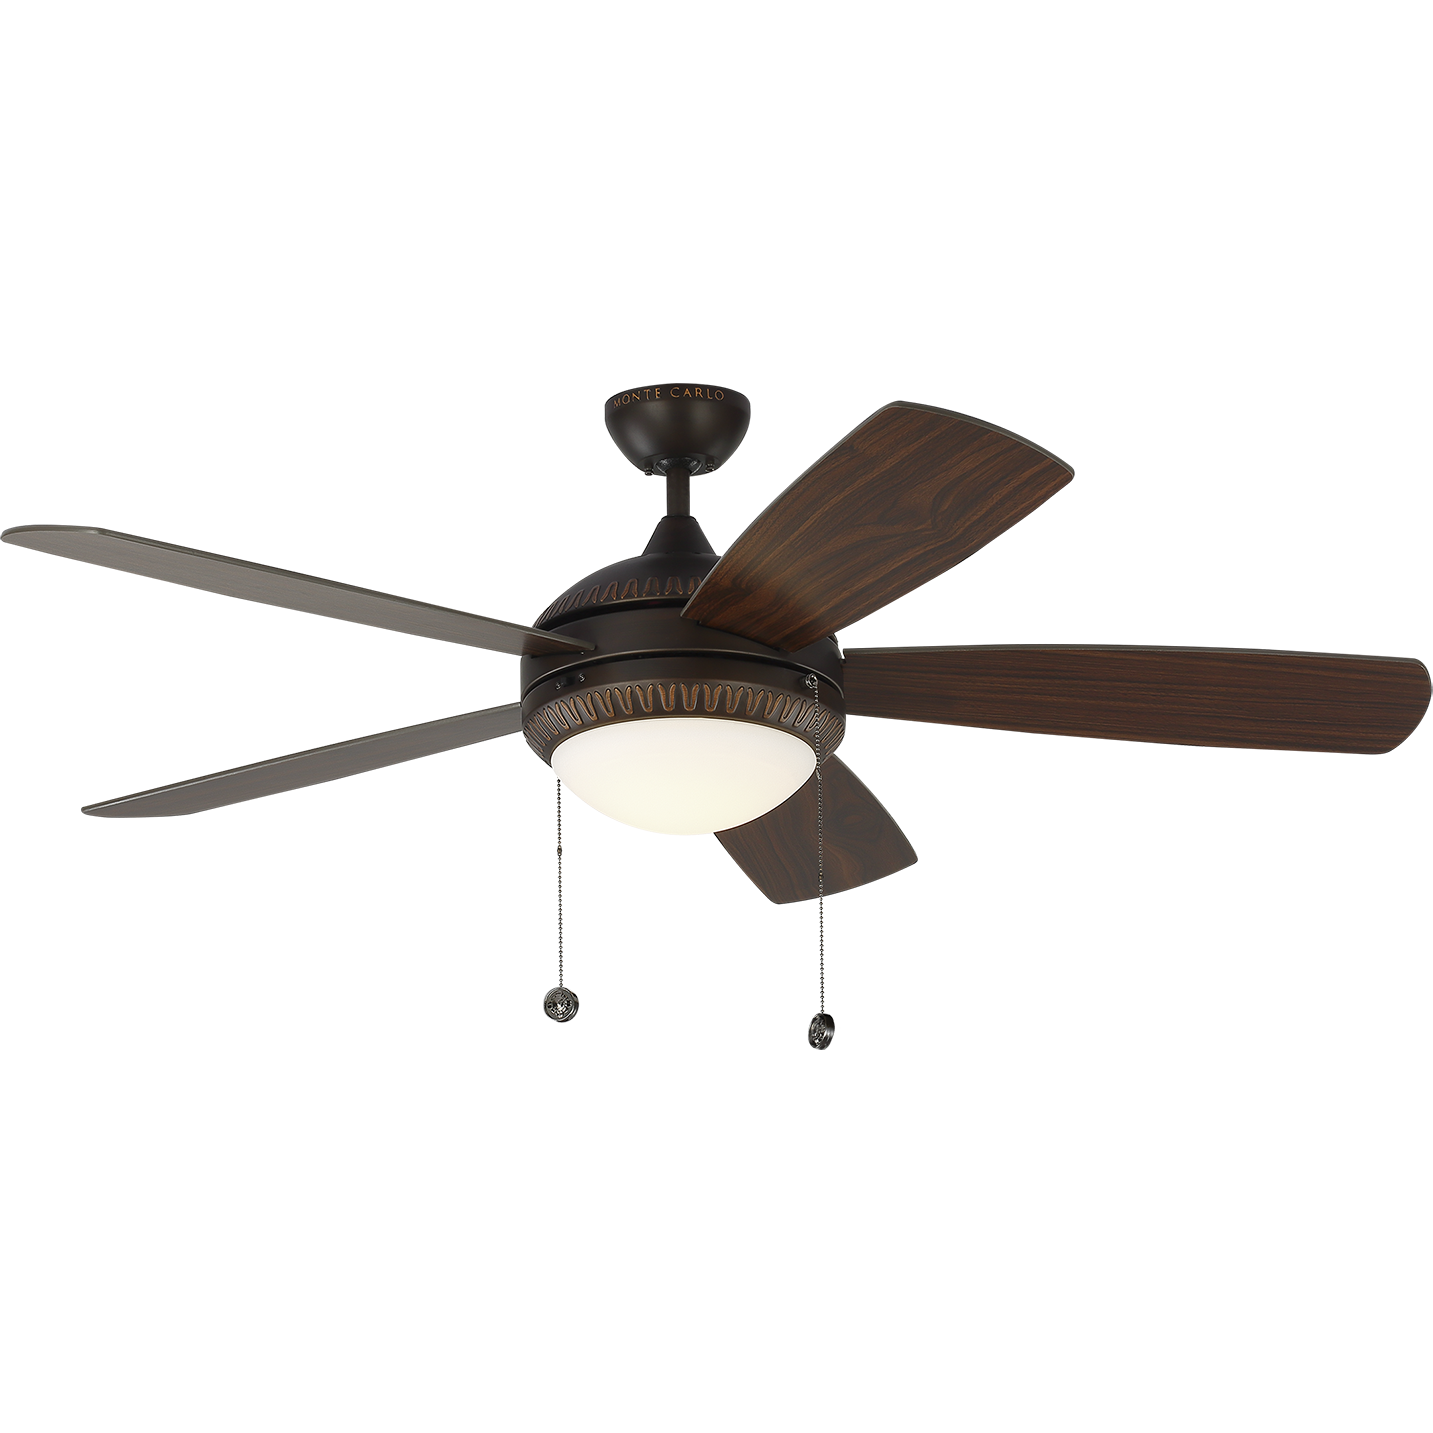 Discus Ornate 52" LED Ceiling Fan